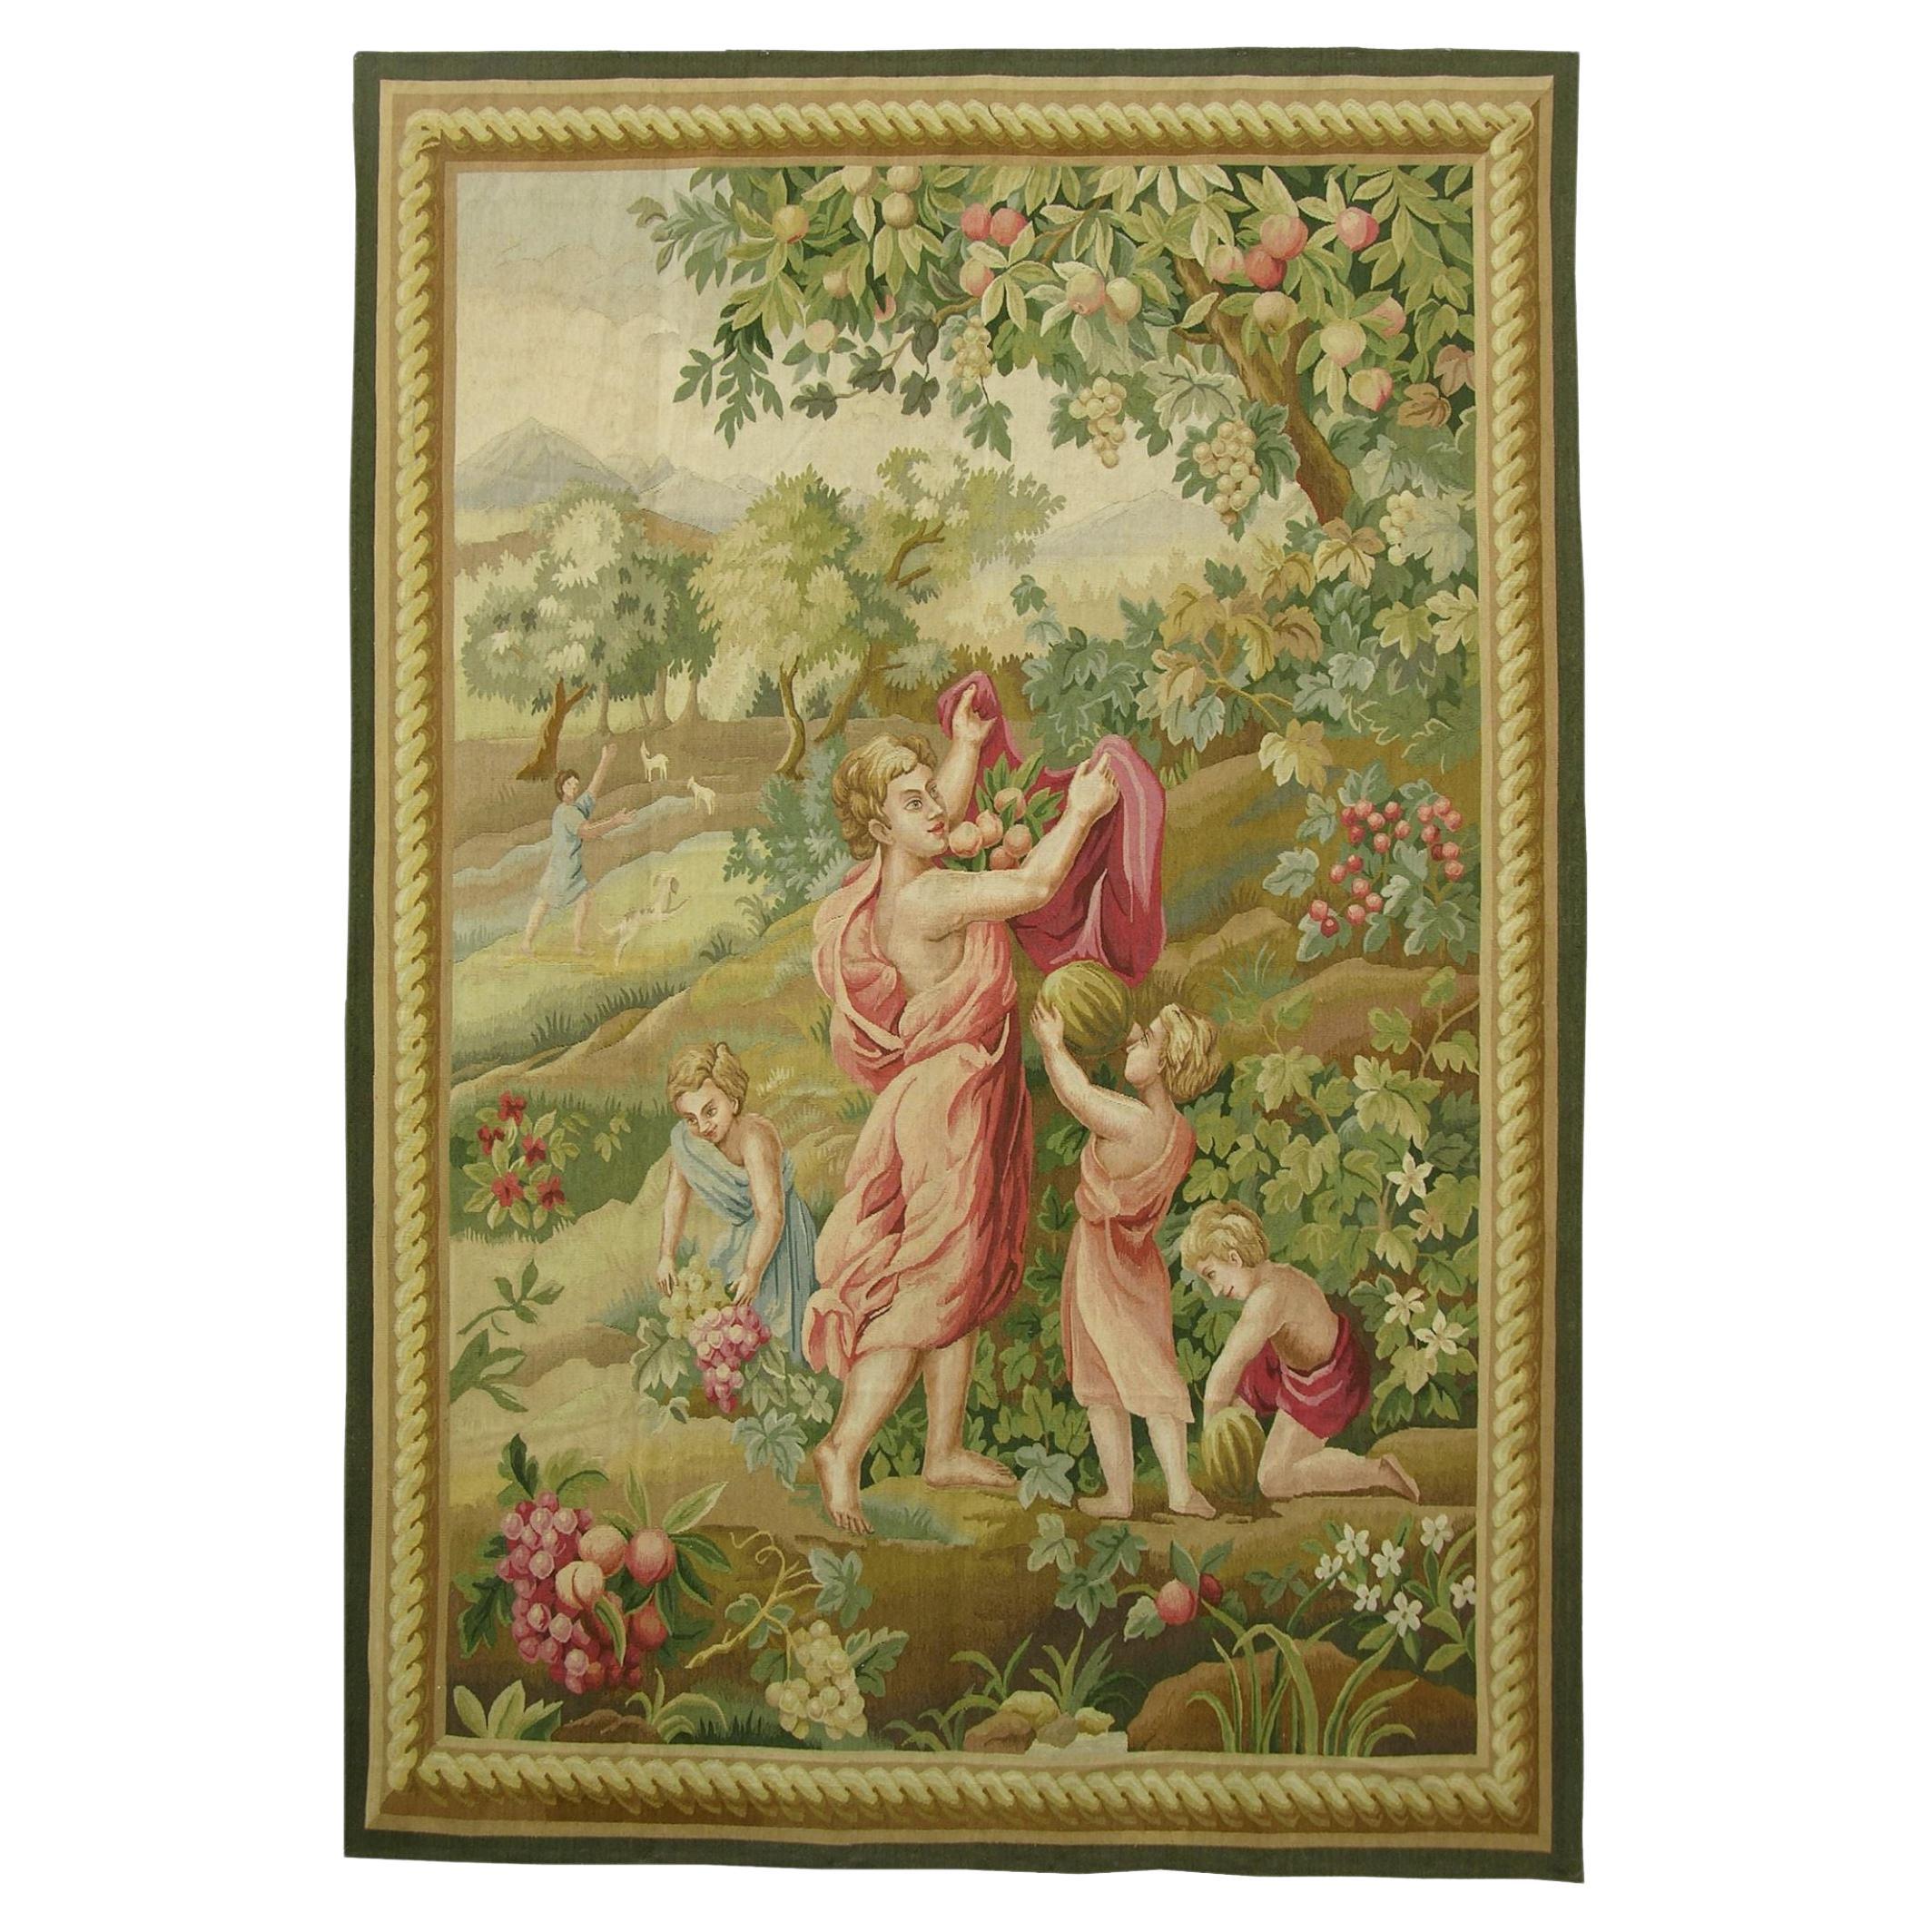 Vintage Tapestry Depicting a Family Gardening 5'7" X 5'3"